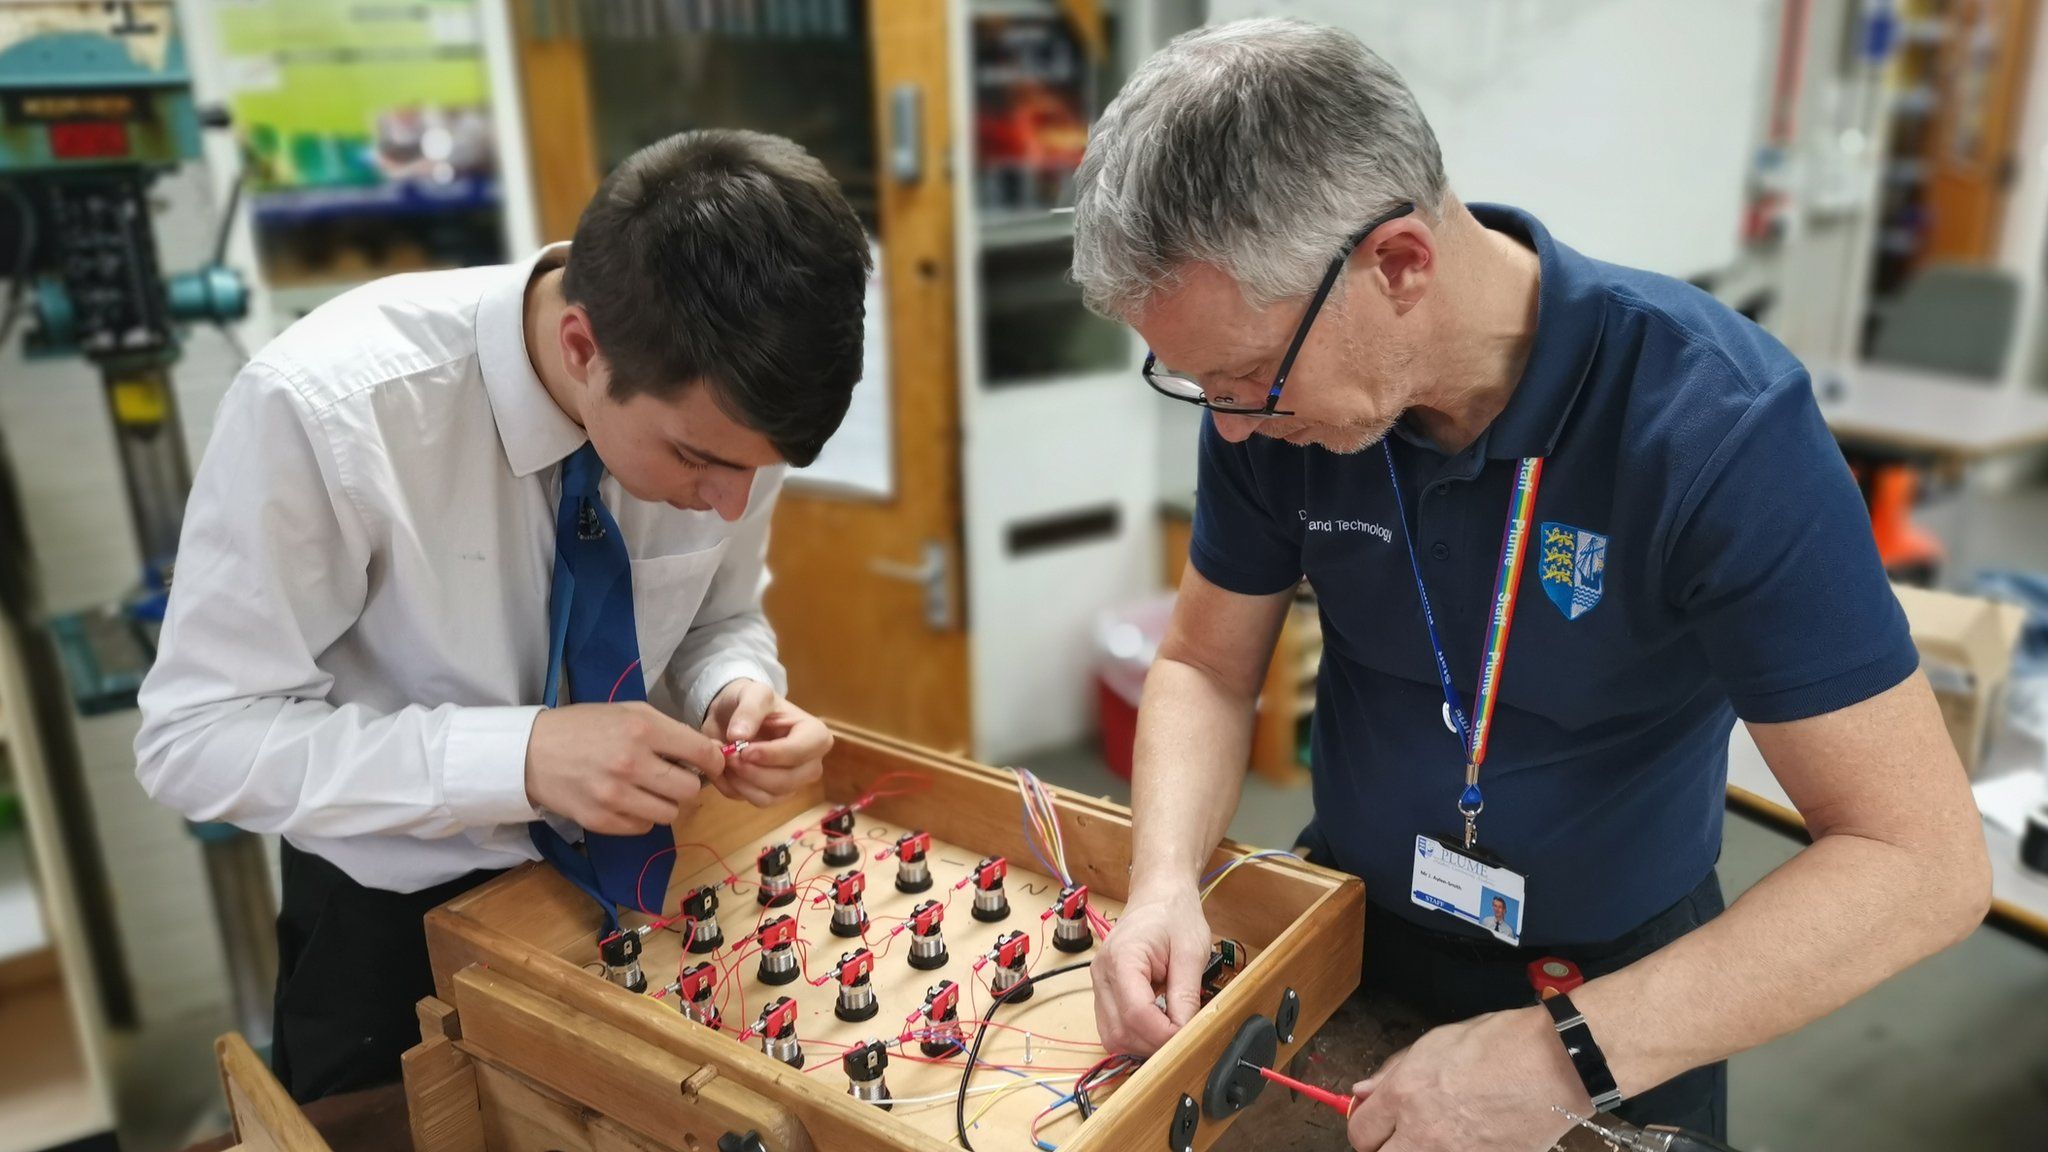 School pupil helping a REMAP engineer to build a games console for people with dementia.